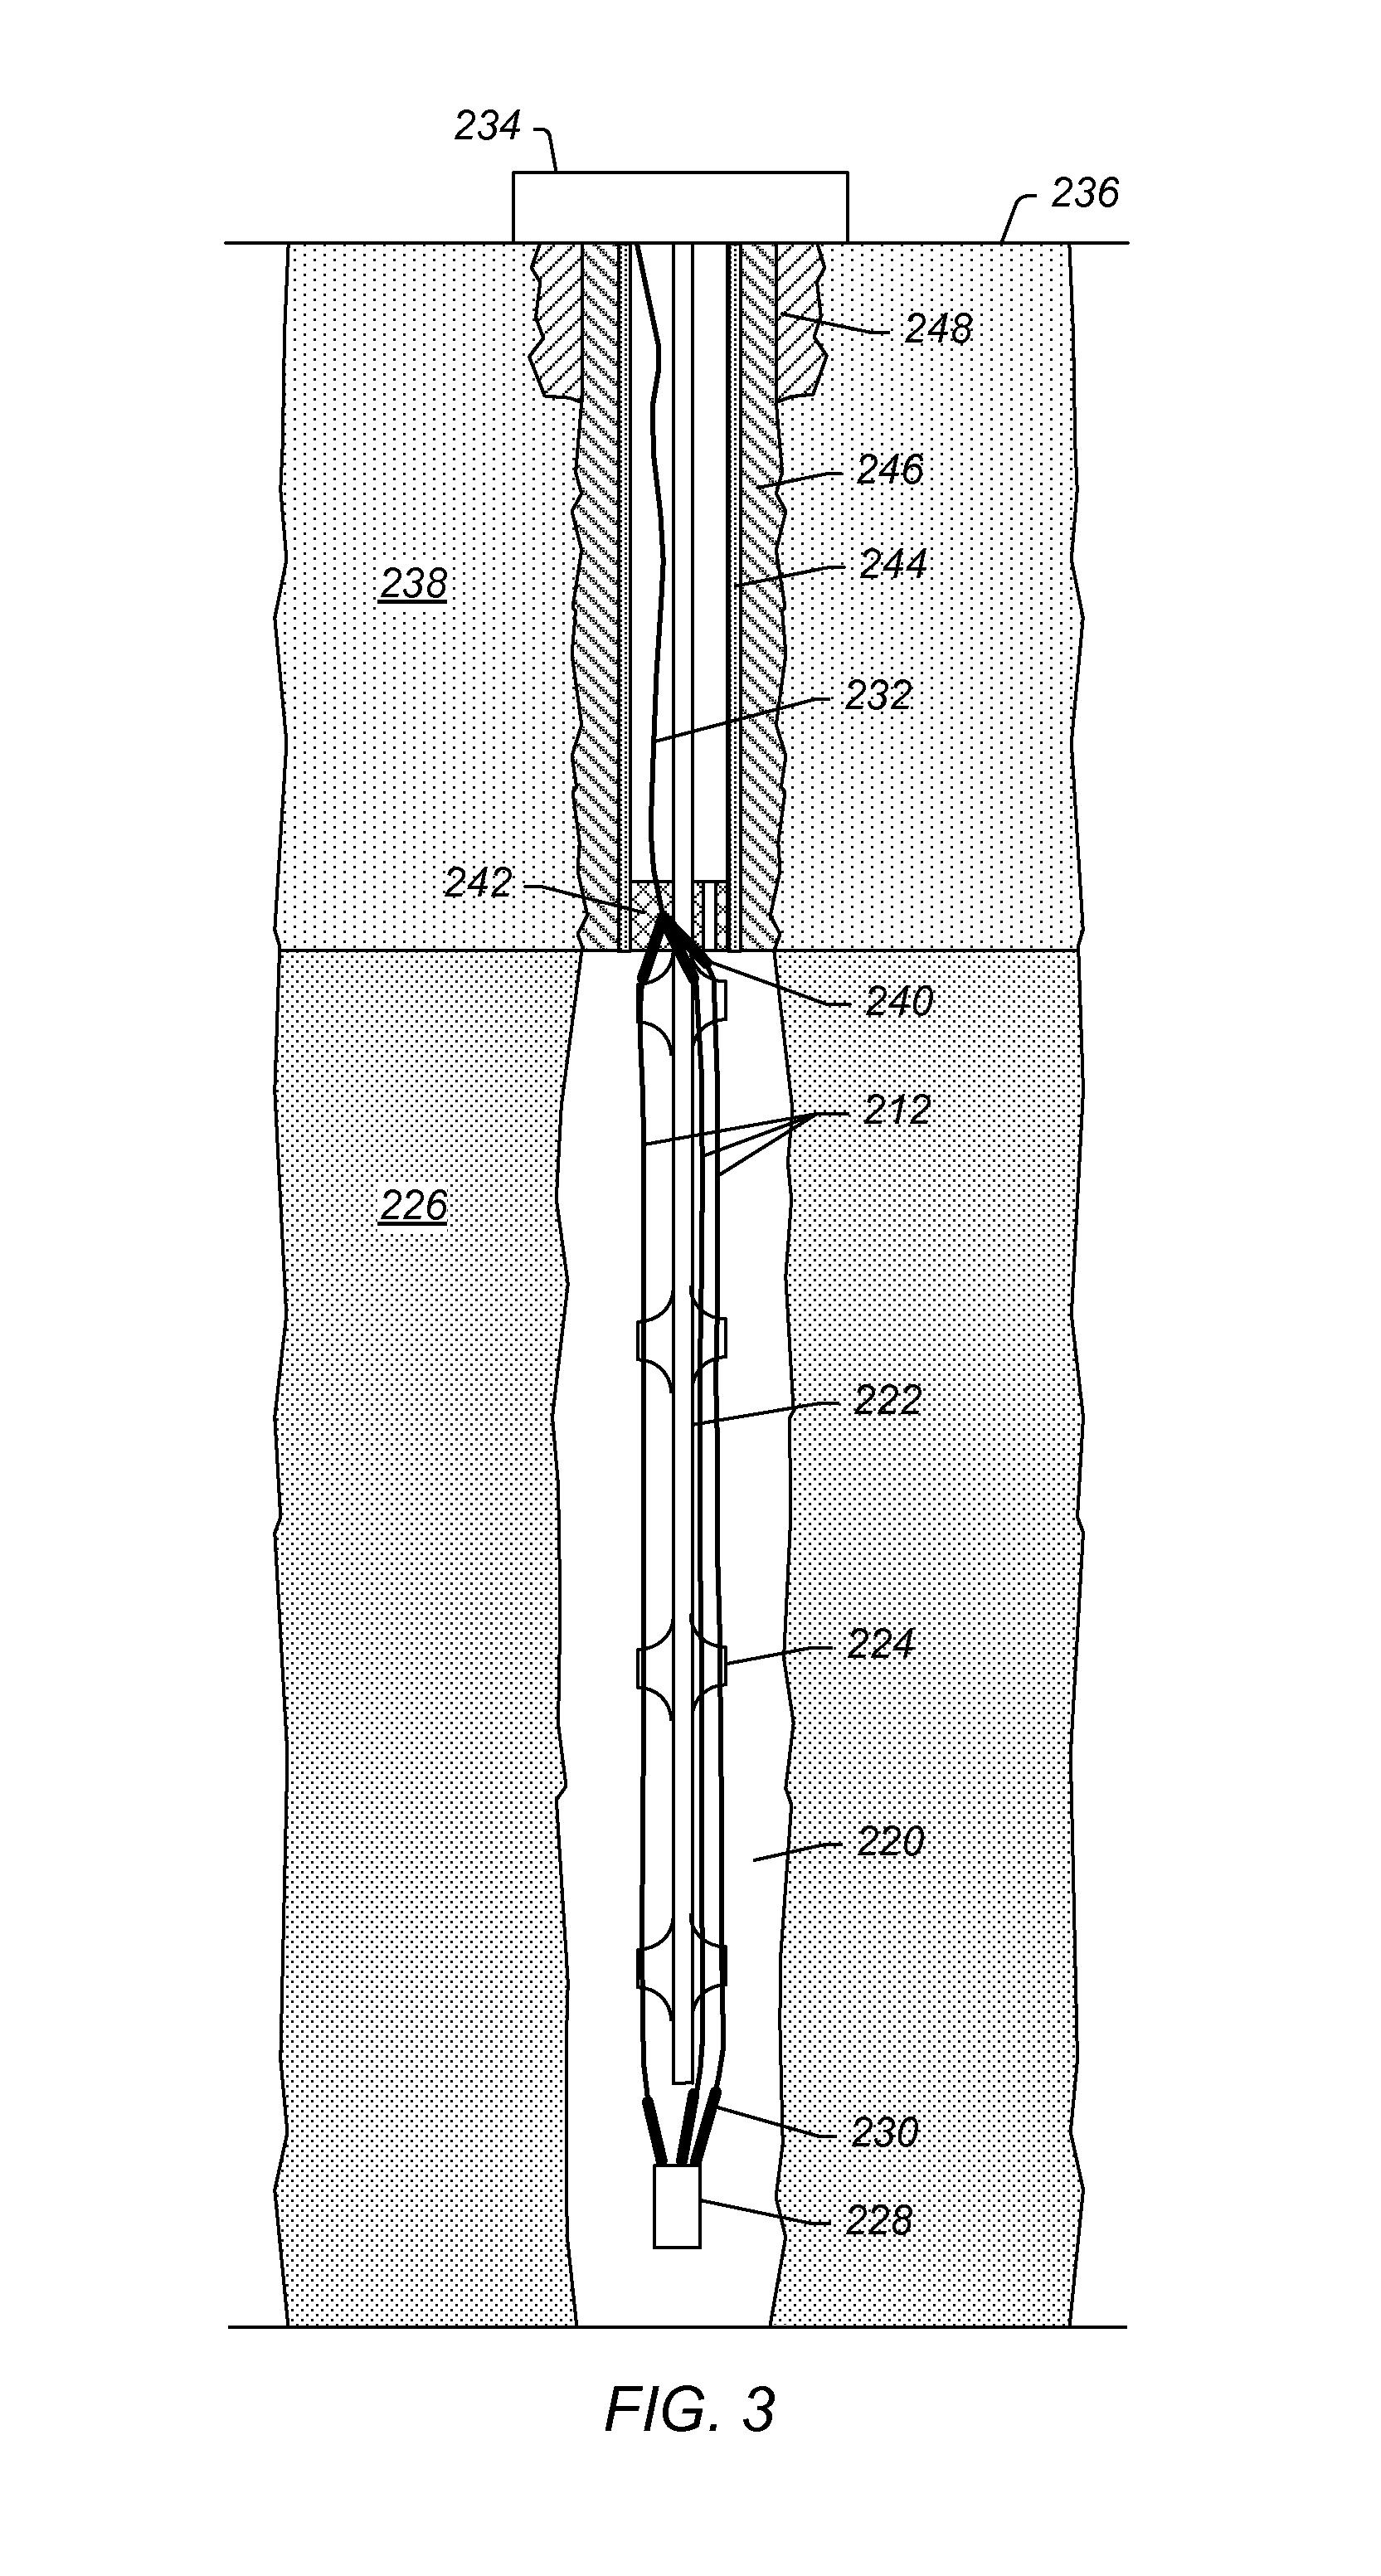 Parallelogram coupling joint for coupling insulated conductors